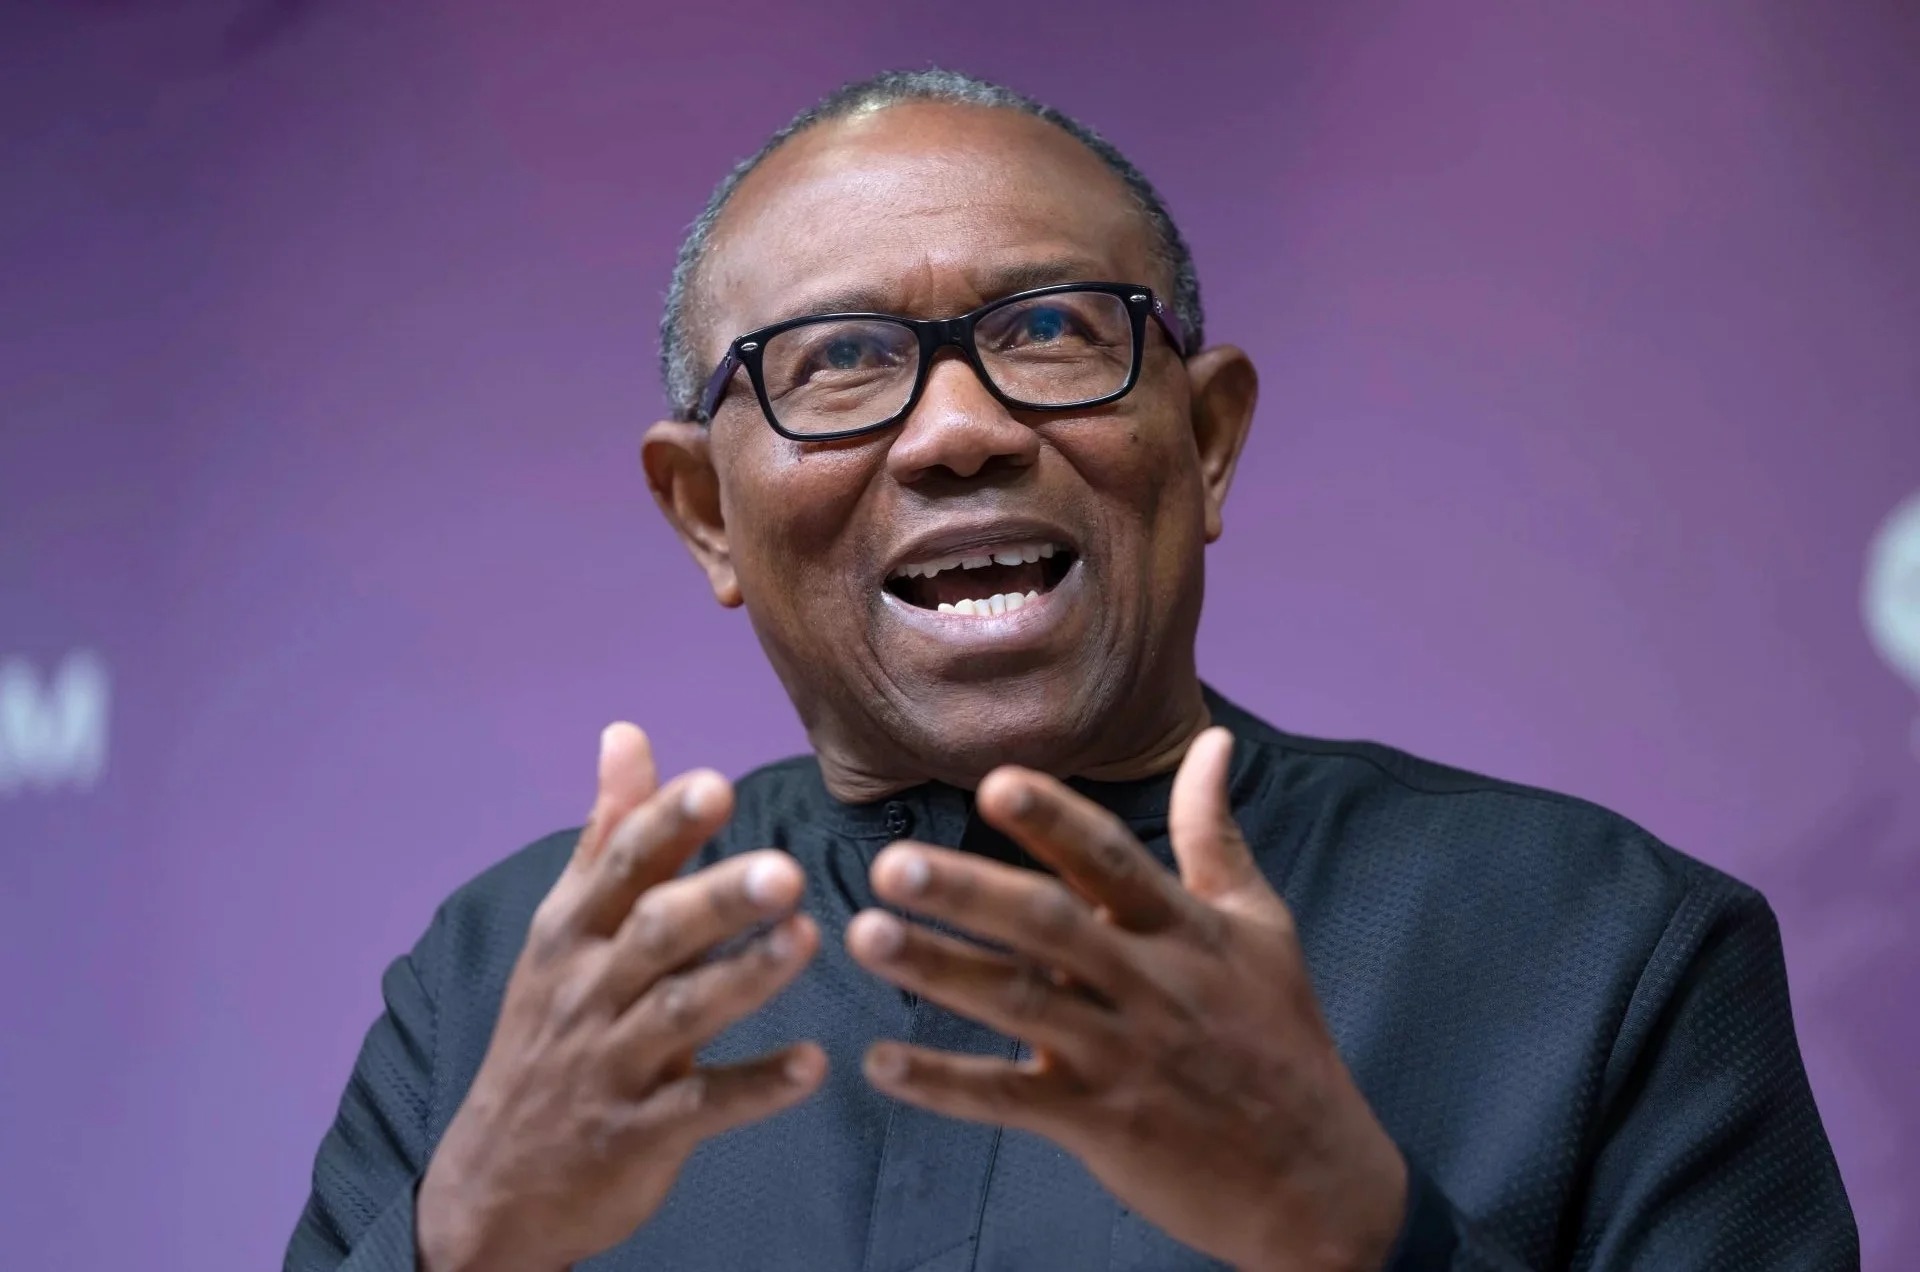 Peter Obi is only interested in merger to end poverty, not seeking powers – LP to Atiku, others